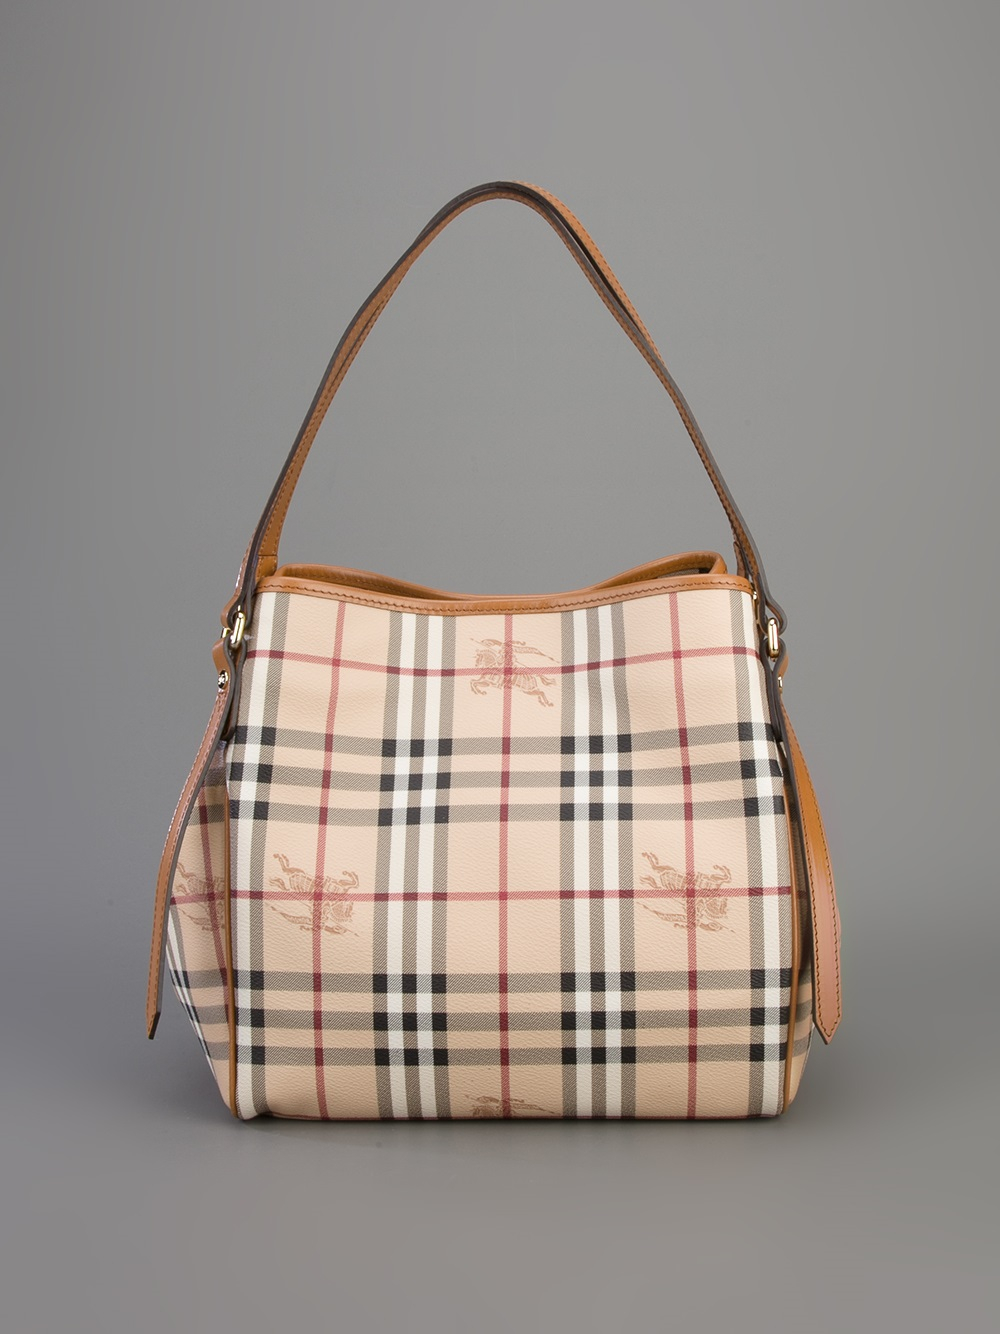 burberry shopper tote Online Shopping for Women, Men, Kids Fashion &  Lifestyle|Free Delivery & Returns! -